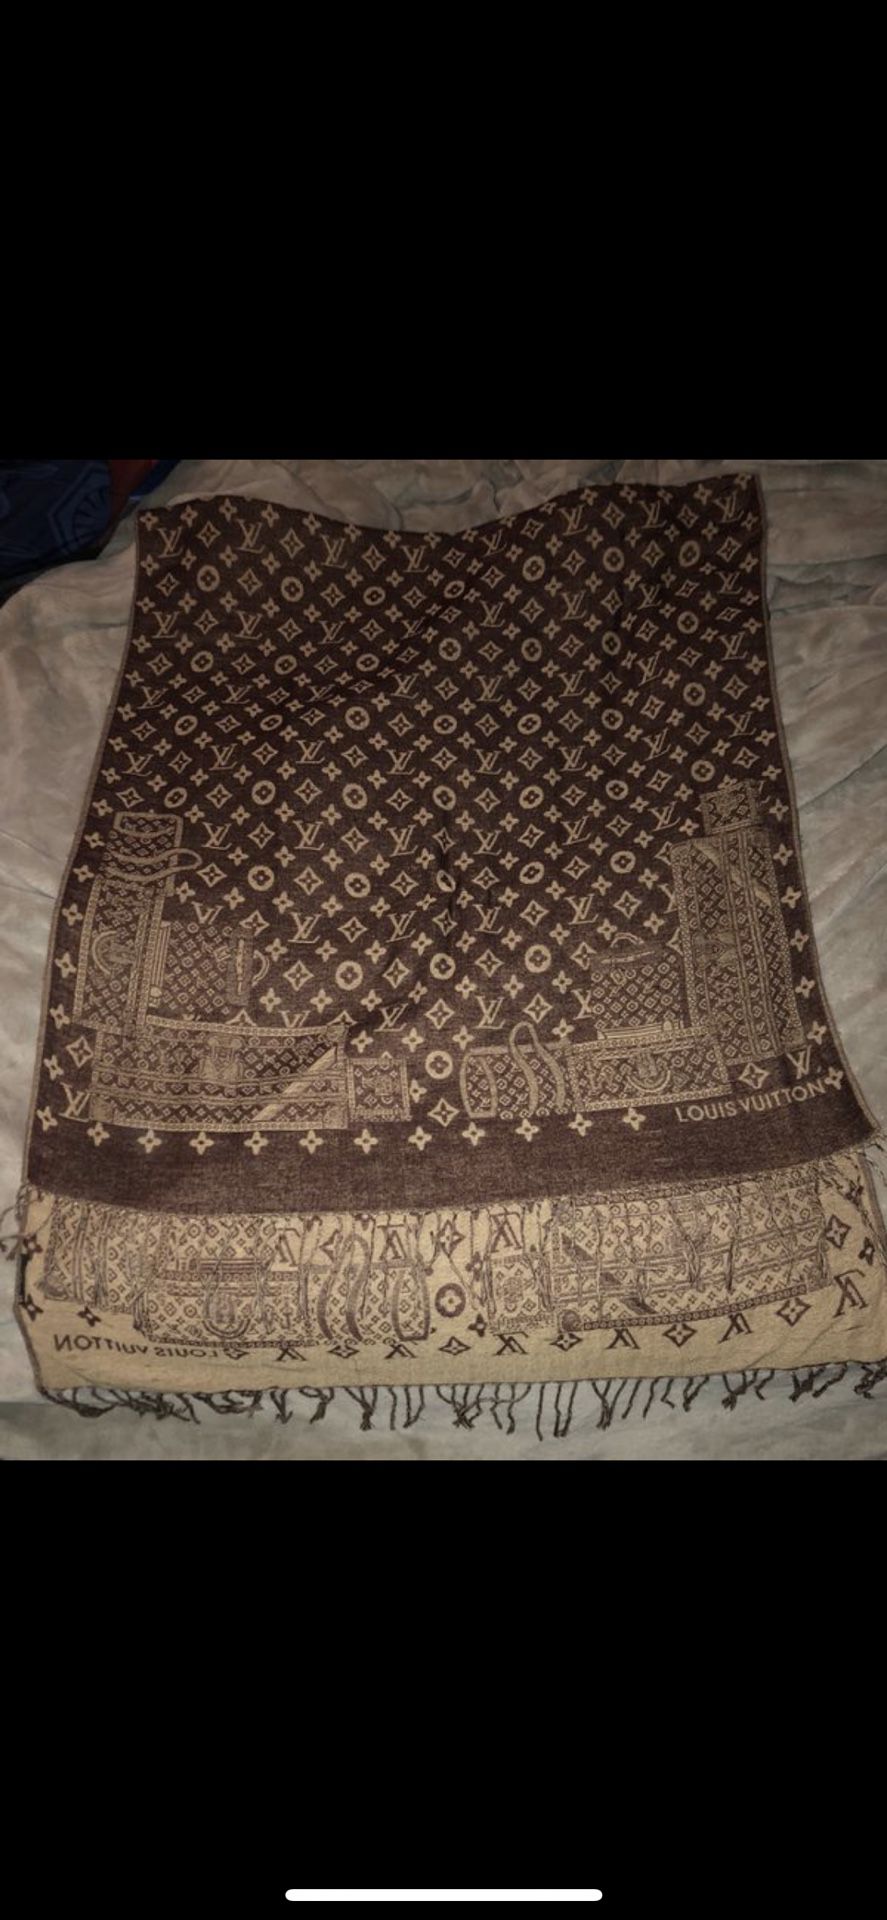 Authentic Louis Vuitton scarf or shawl retail $600